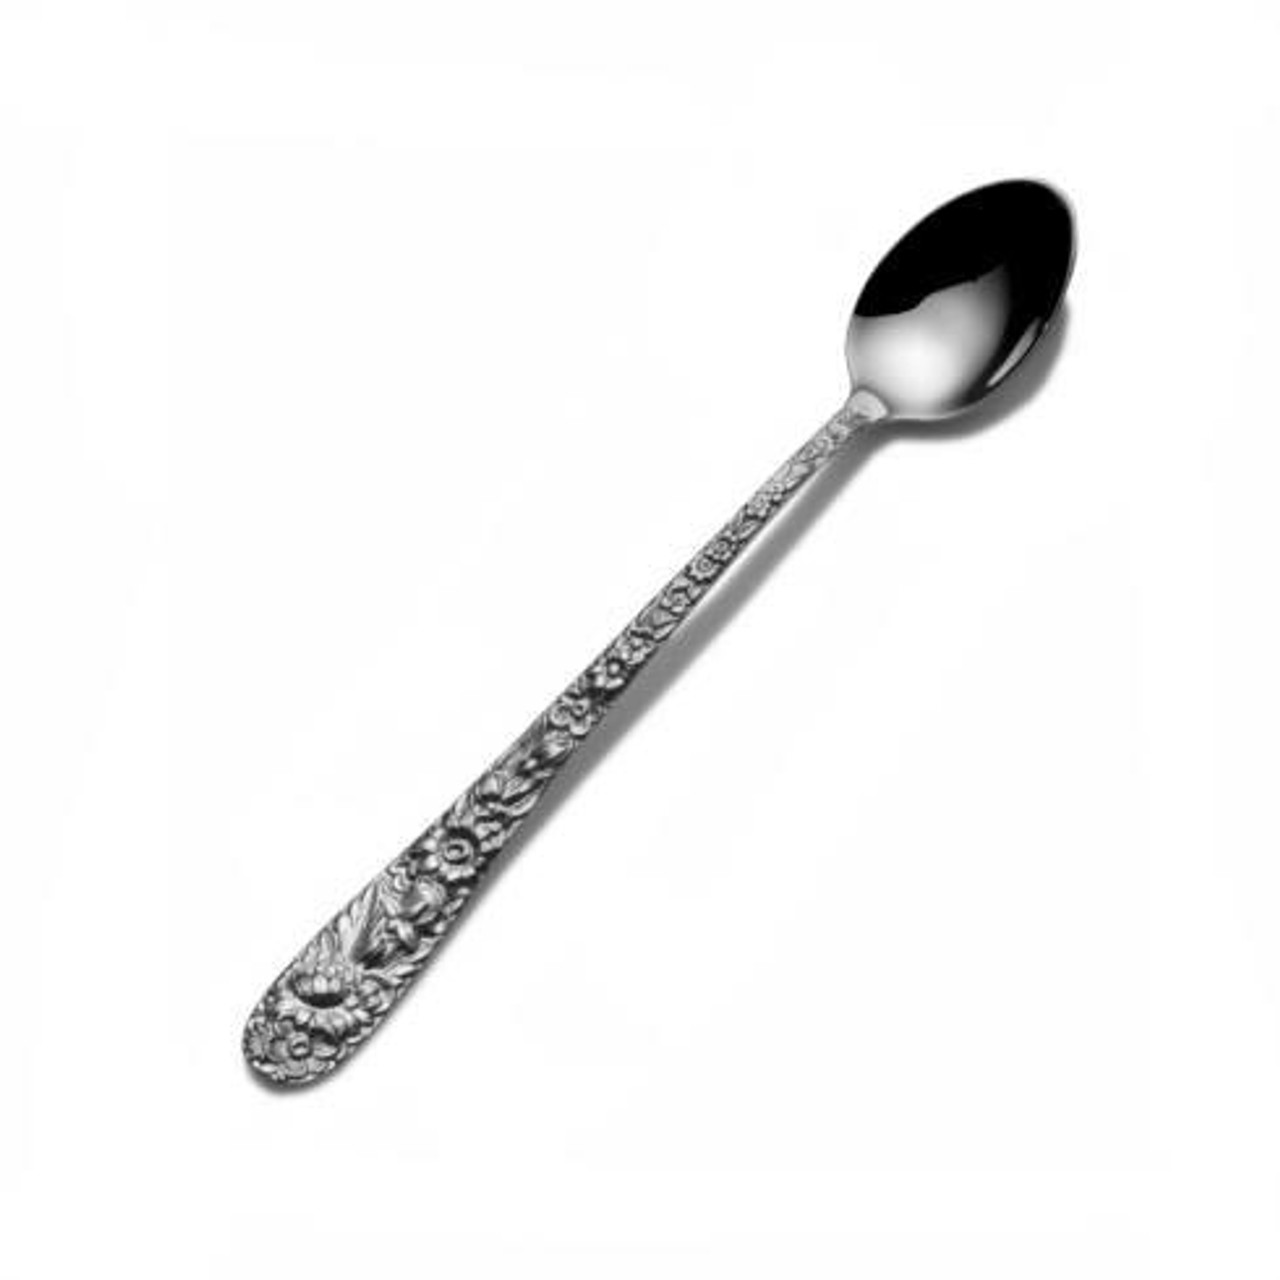 Sterling Silver Baby Spoon: Kirk Stieff Repousse Infant Feeding Spoon in  Sterling Silver